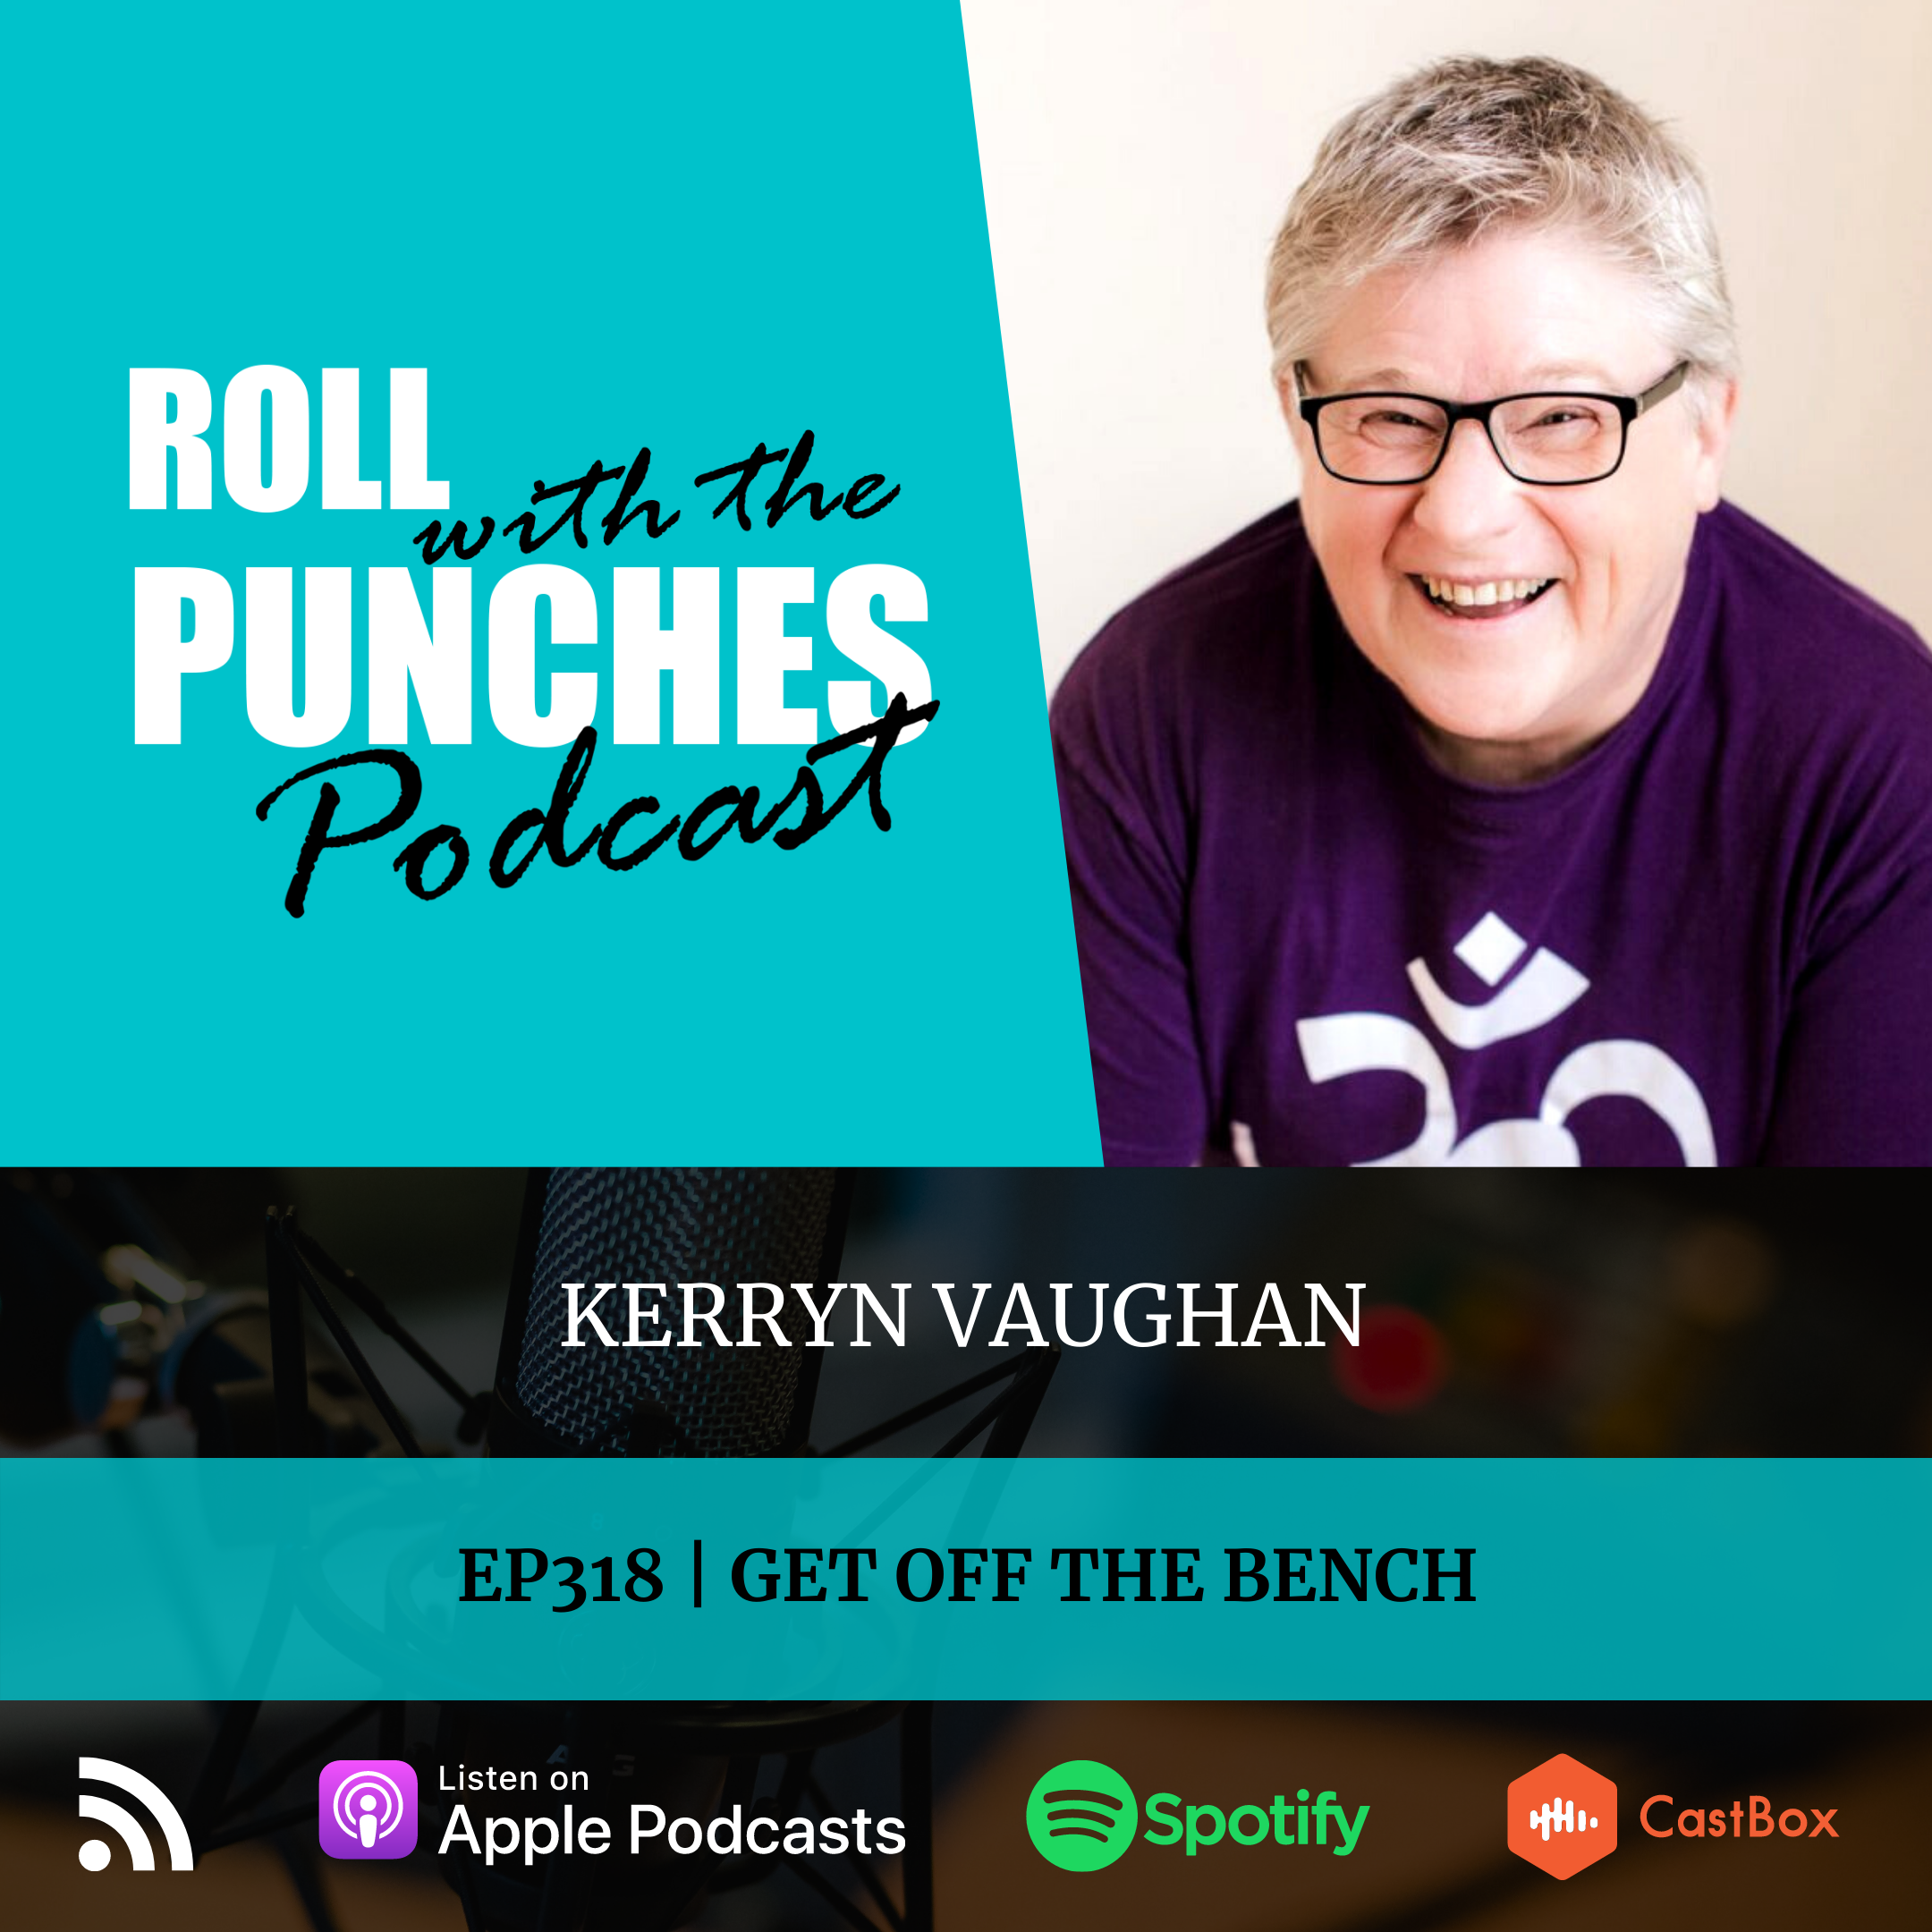 Roll with the punches -kerryn vaughan.png